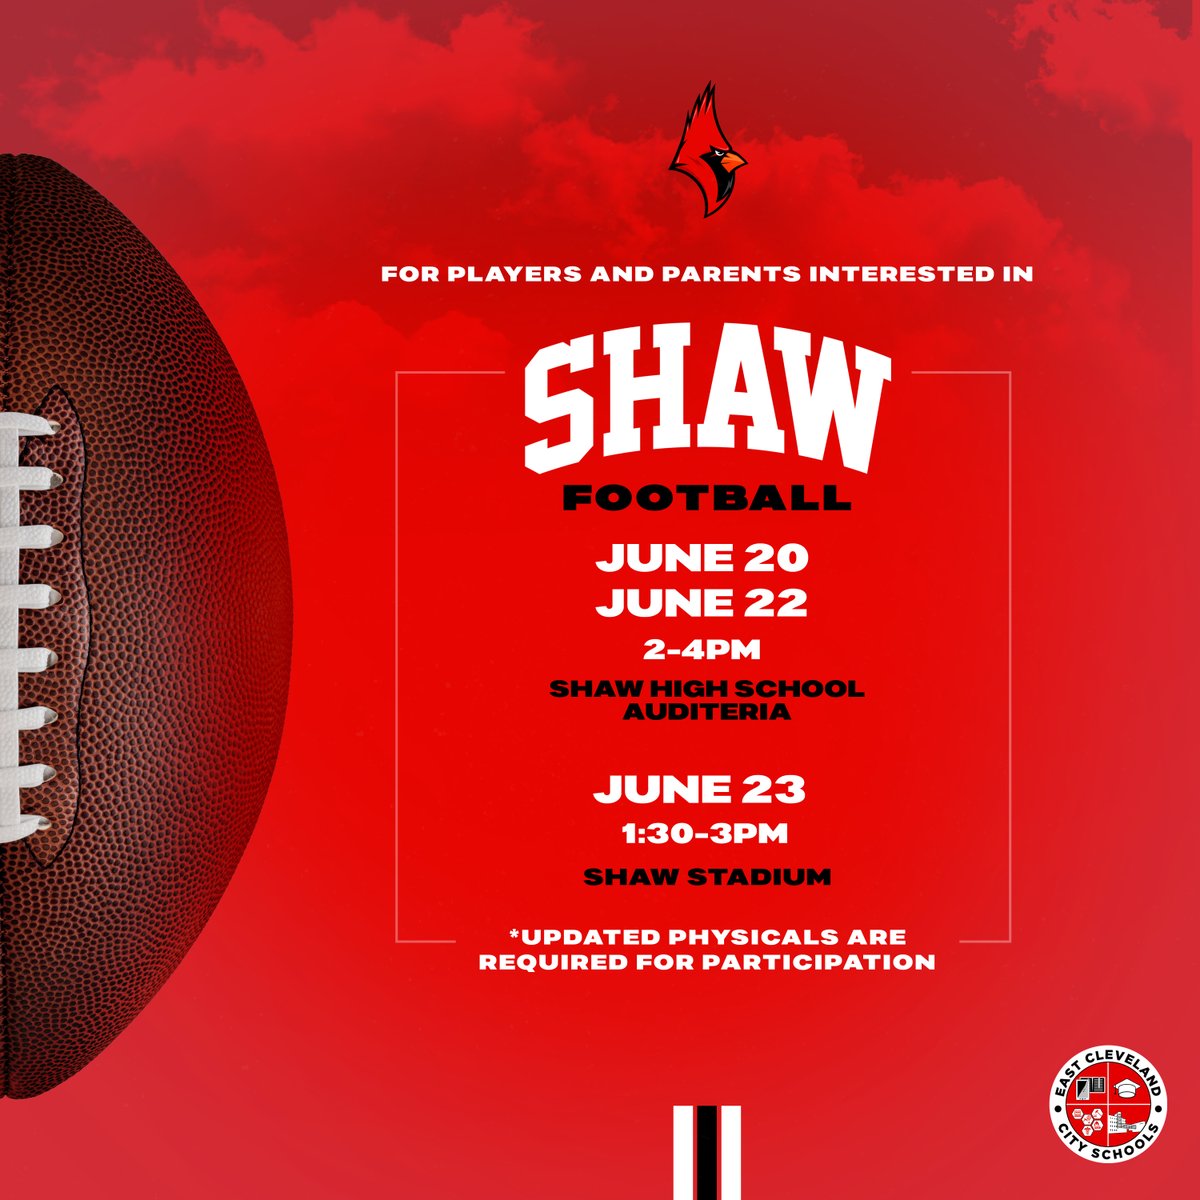 Shaw High School introduces the new Head Coach of Shaw Football Team, Mr. Marvis Hood Jr. We are glad to have you aboard and wish you great success this season. GO! FIGHT! WIN! #shawfootball #flywithus @the_gainzumake